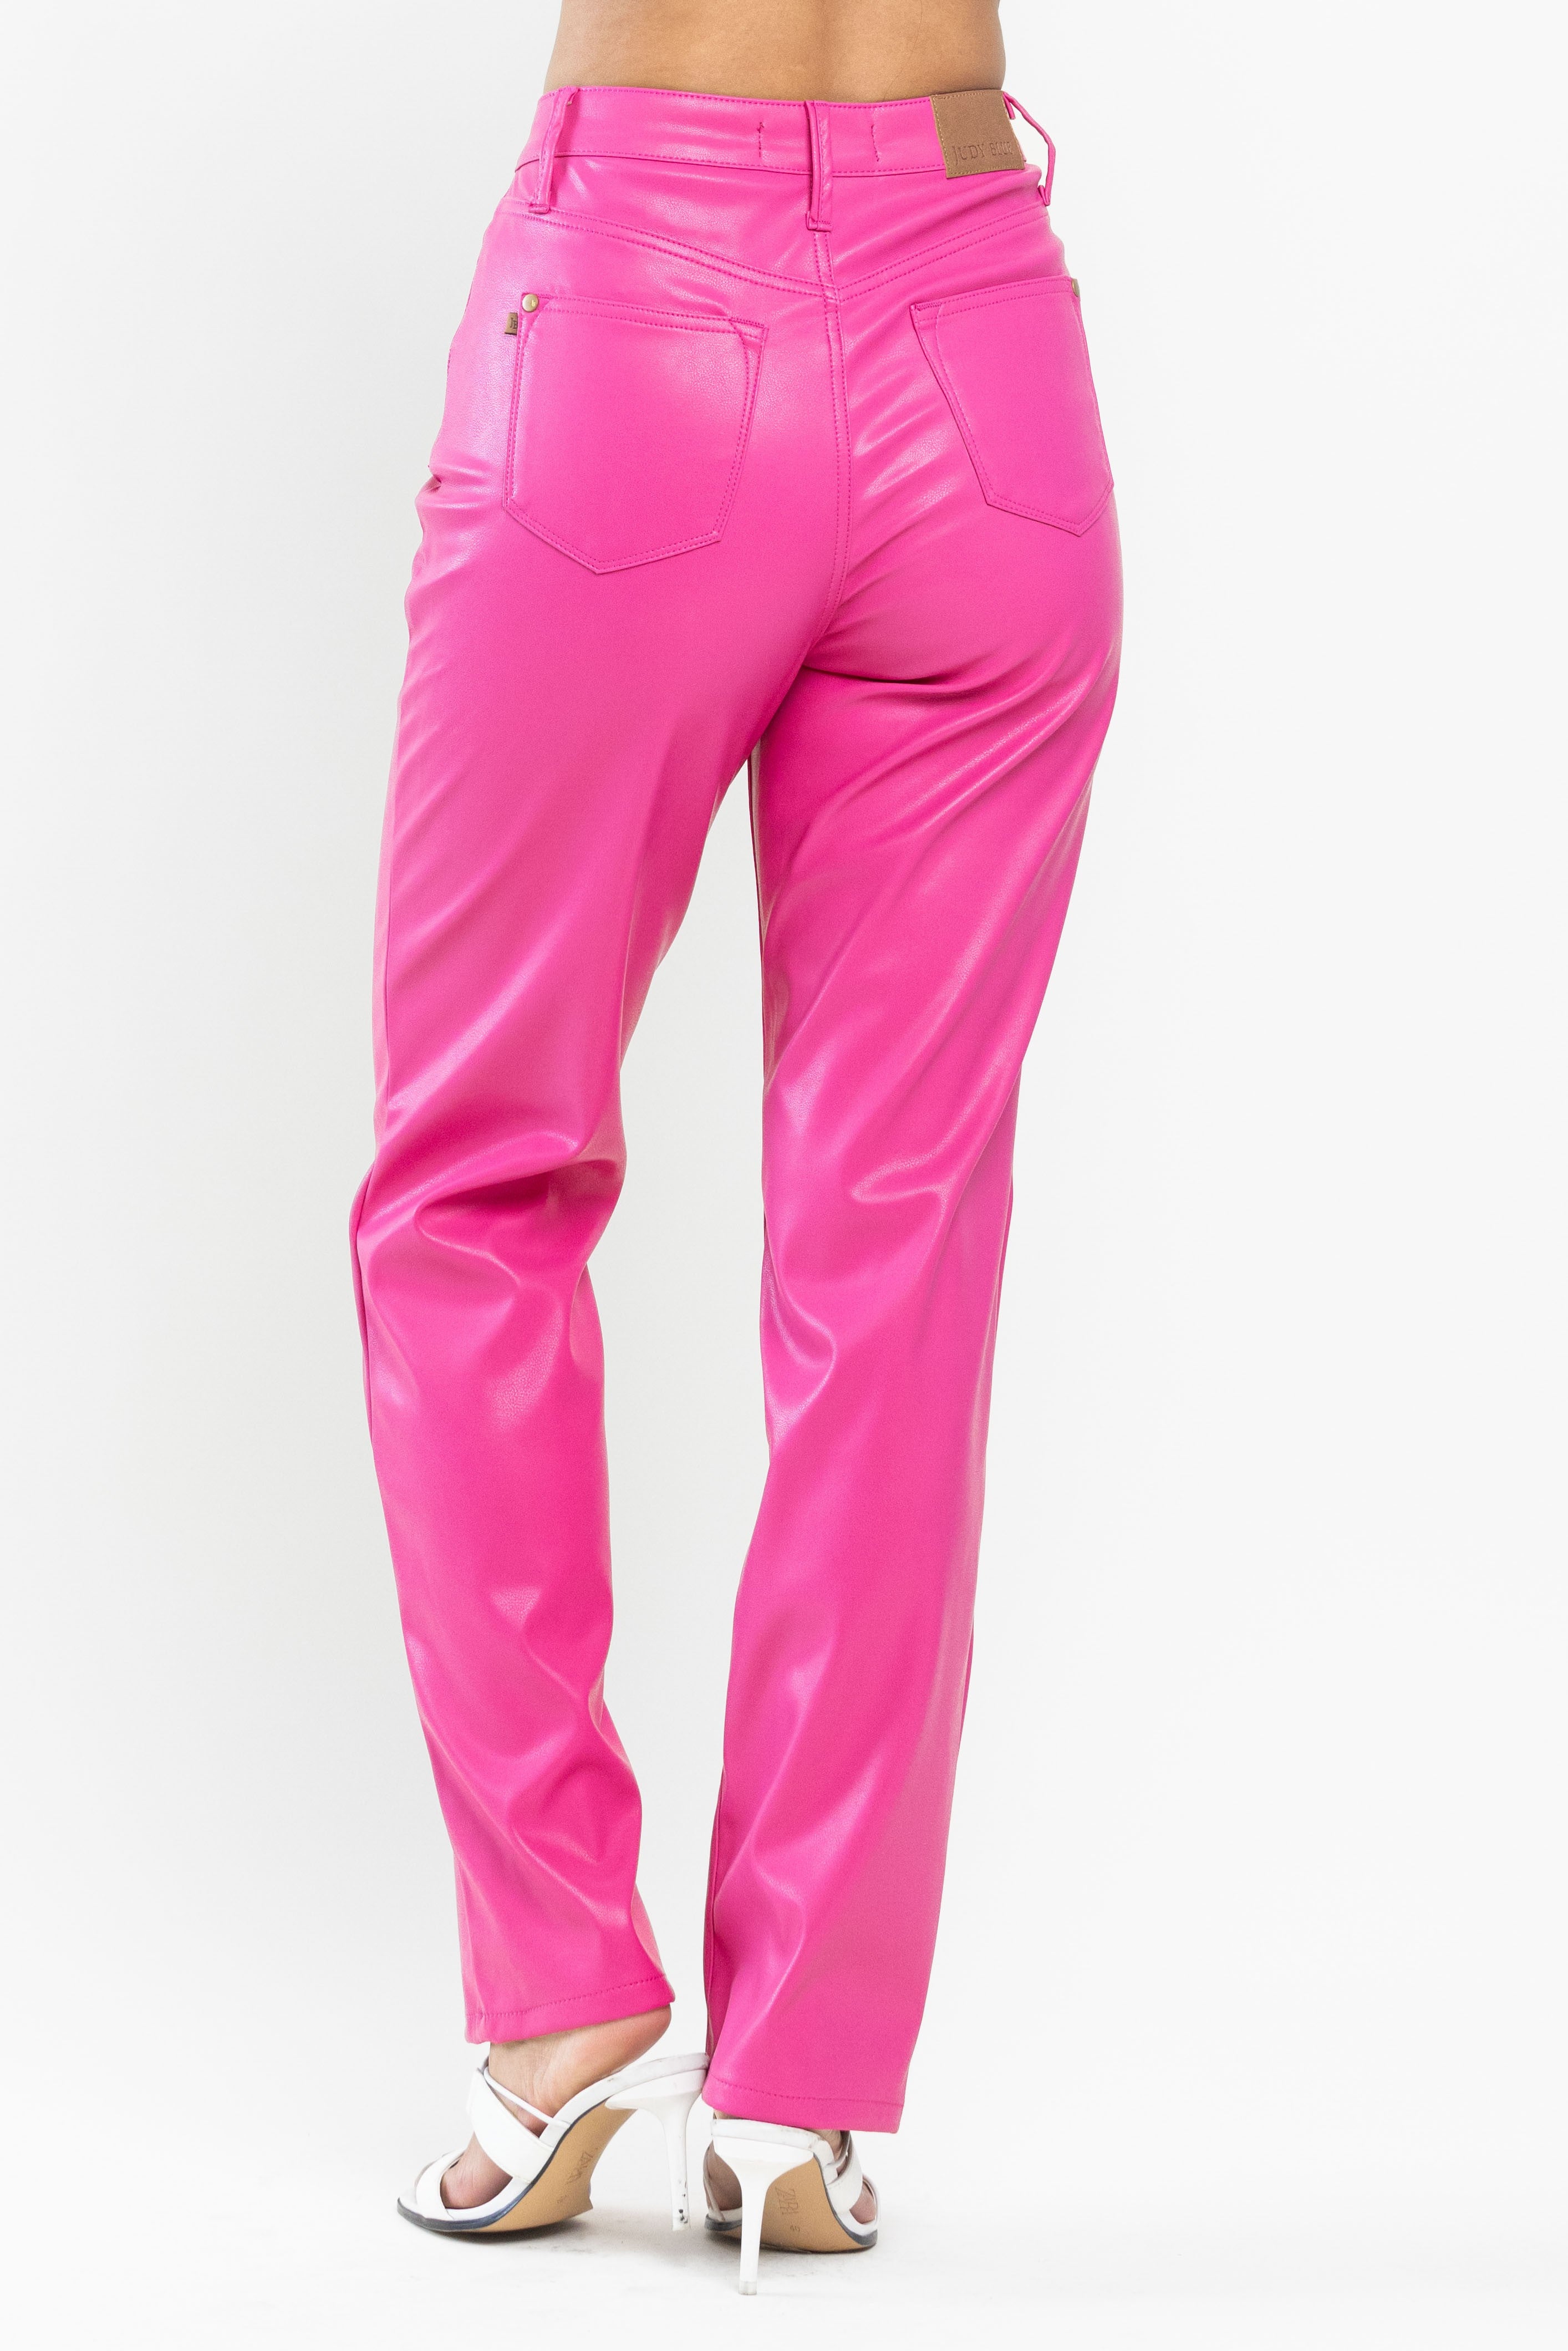 Judy Blues Blue Pink Faux Leather Straight High Waist Tummy Control Pant Pants